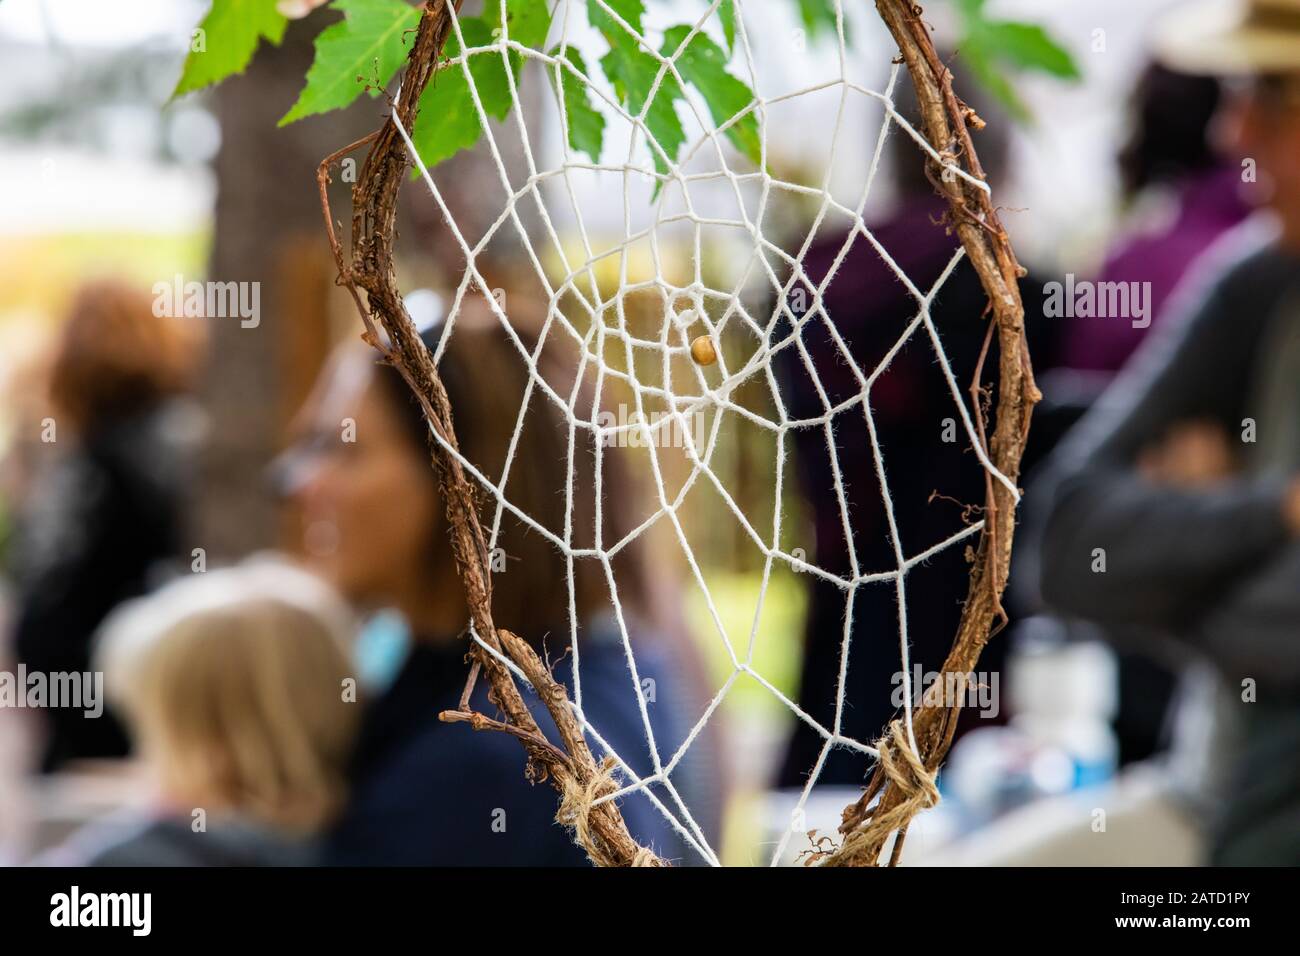 Closeup of handmade dreamcatcher hanging on tree branch with defocus group of people sitting and looking at something at world and spoken word event Stock Photo